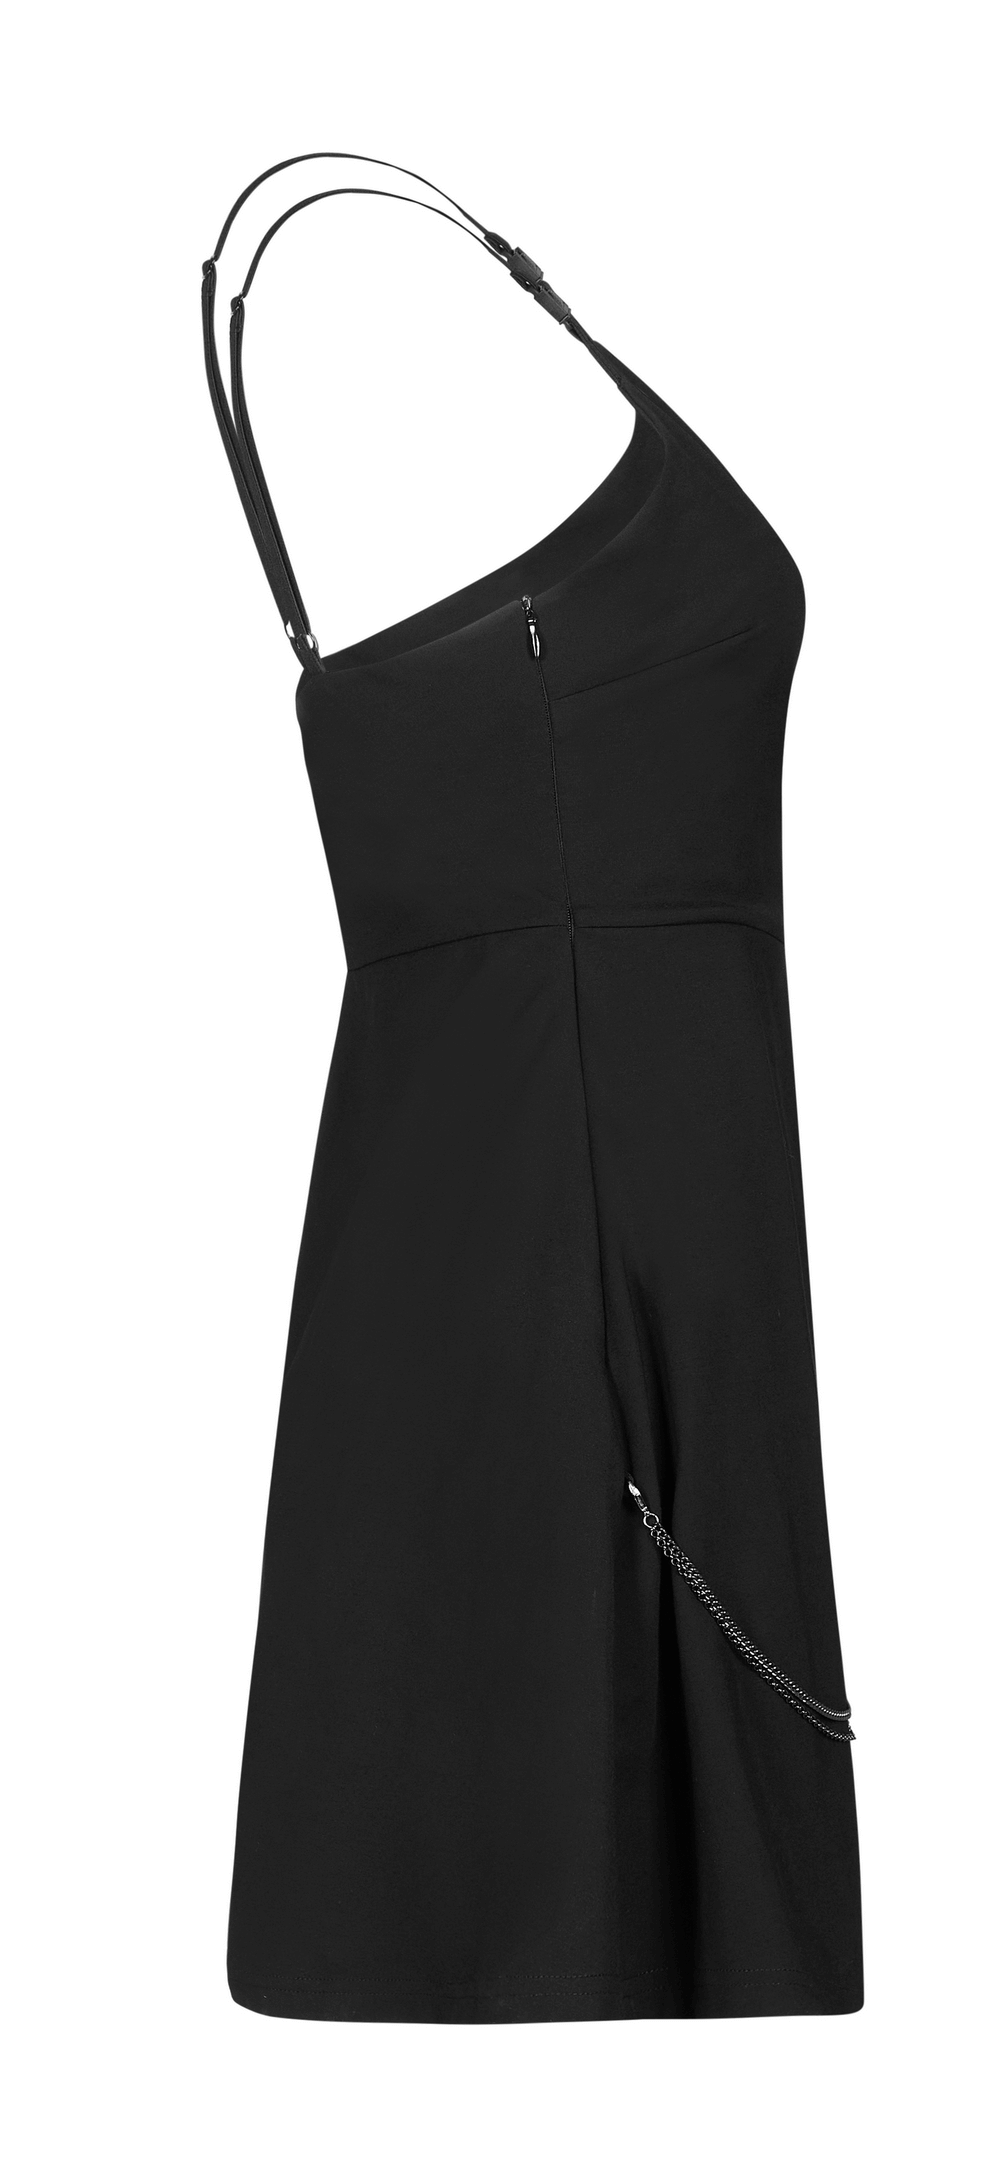 Chic V-Neck Dress with Detachable Chain Accent